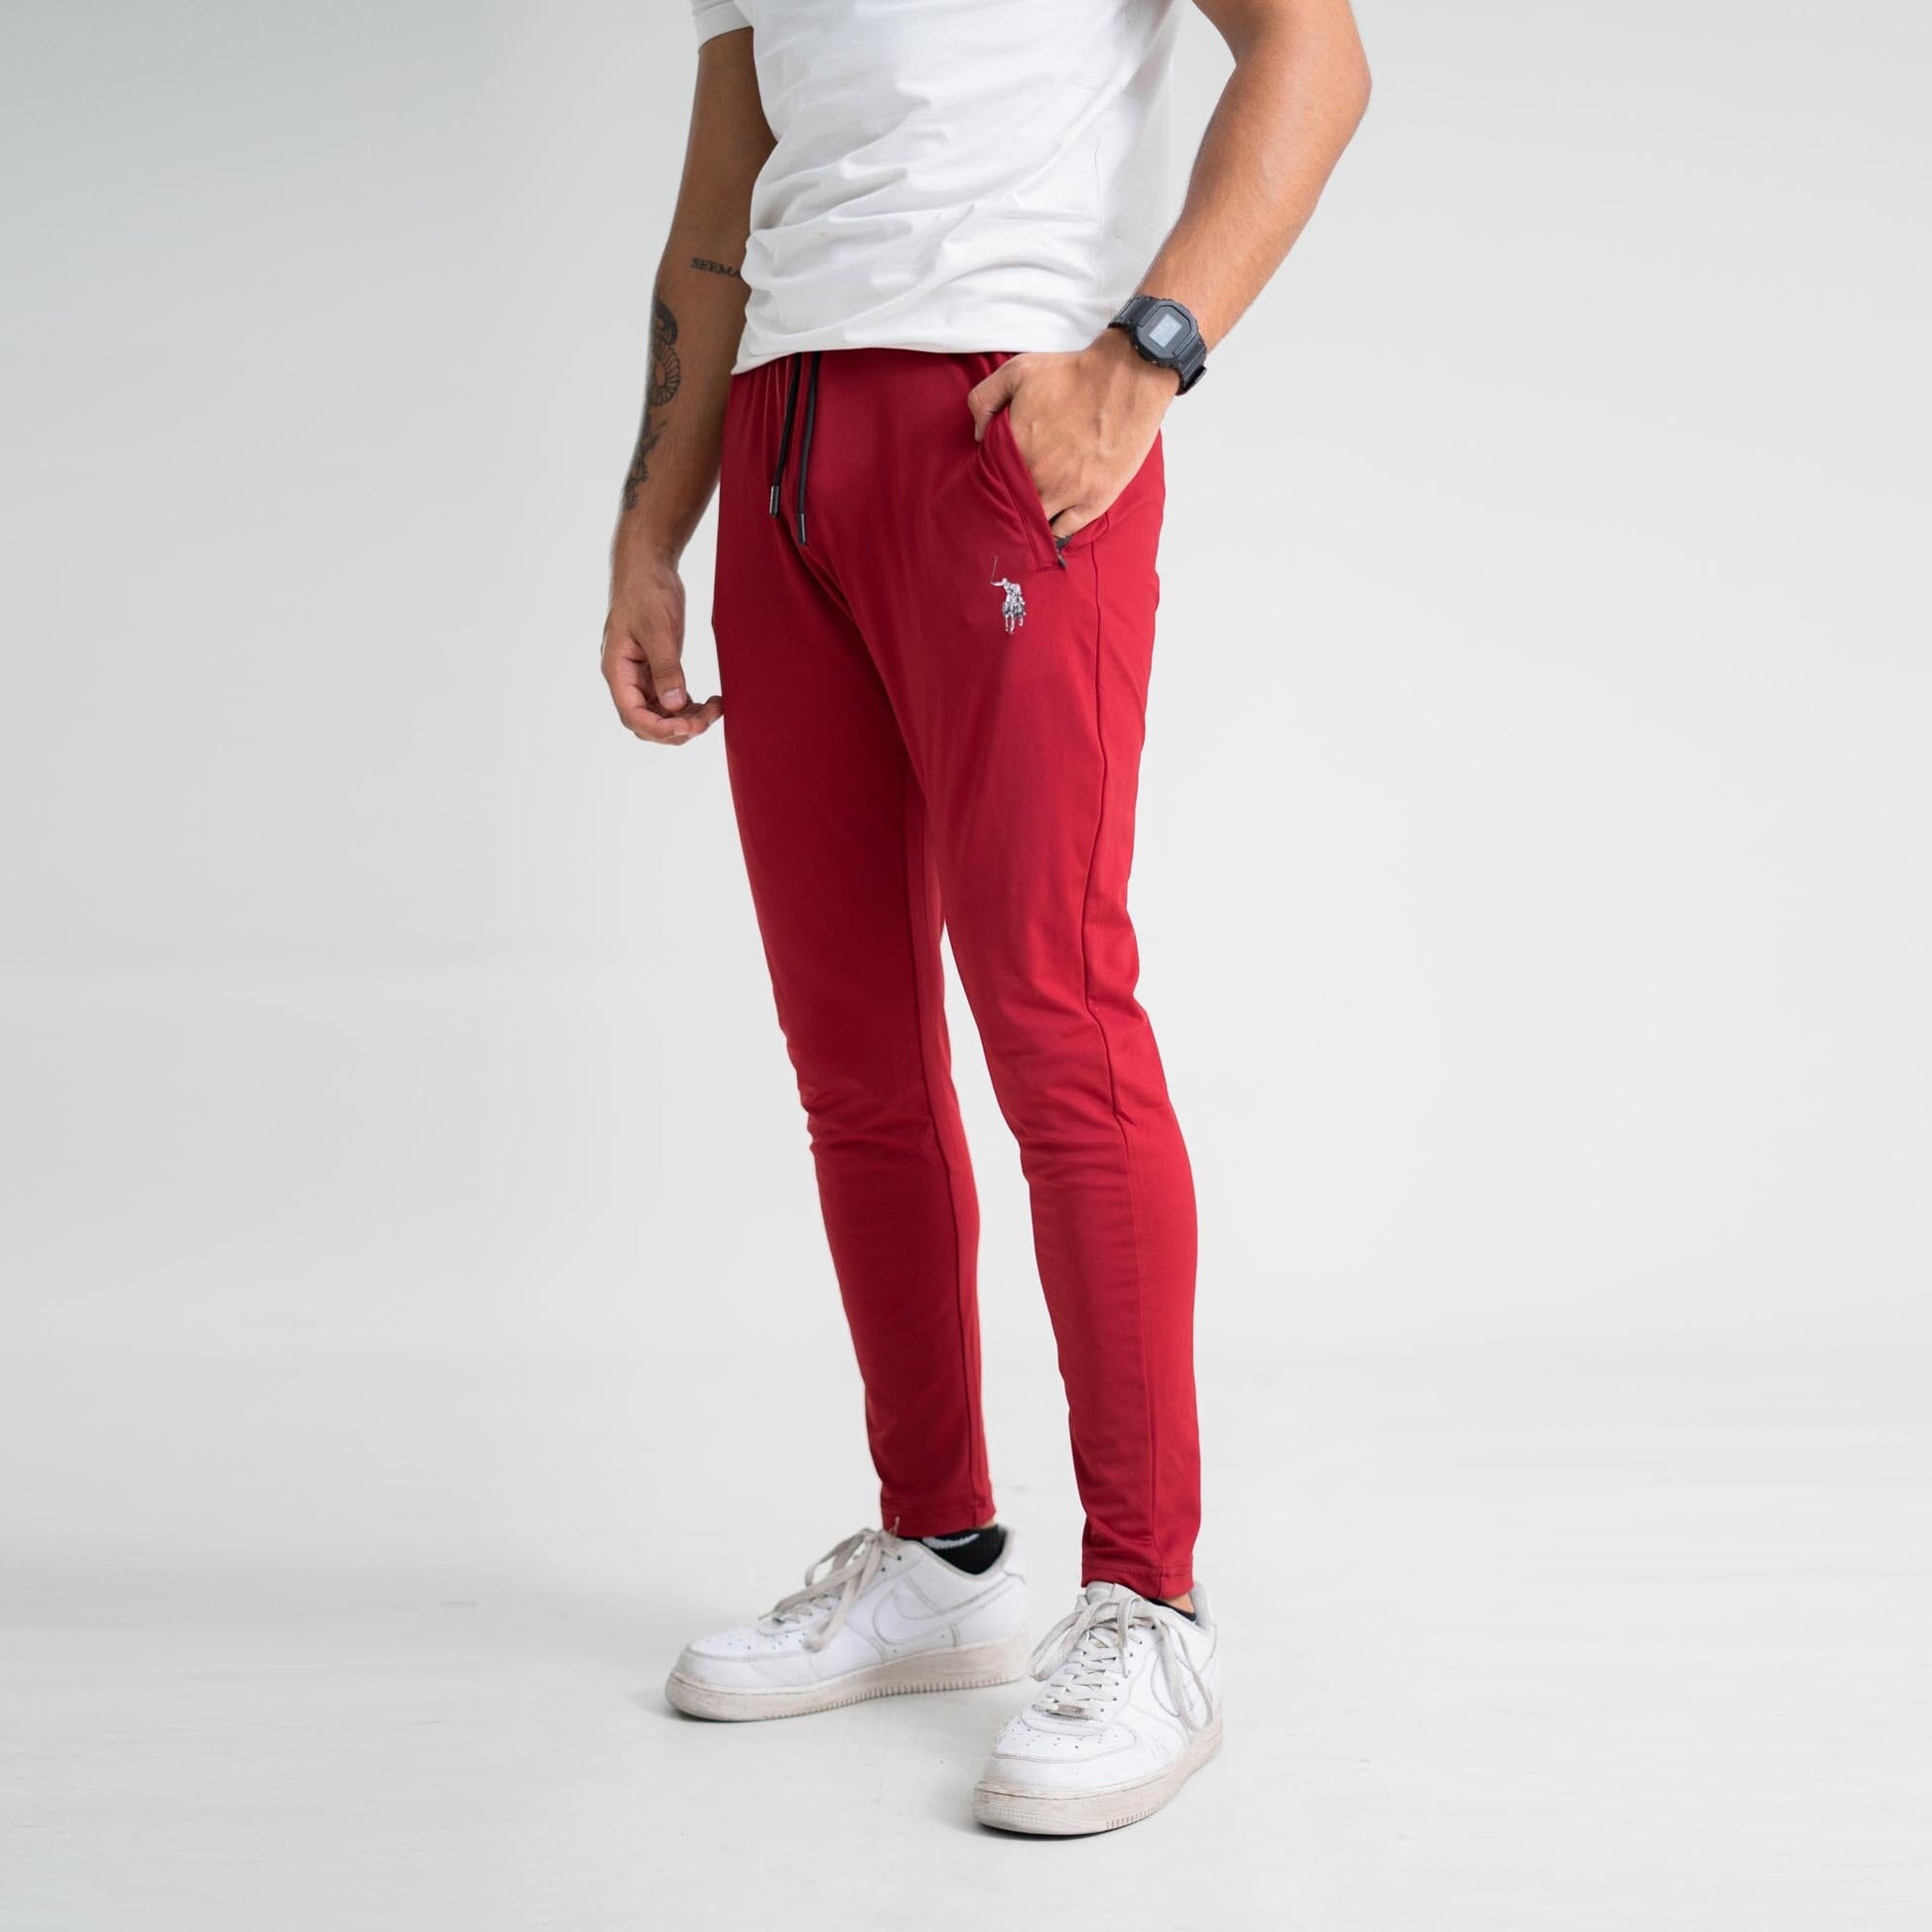 Polo Athletica Men's Slim-Fit Gym Joggers with Pony Print